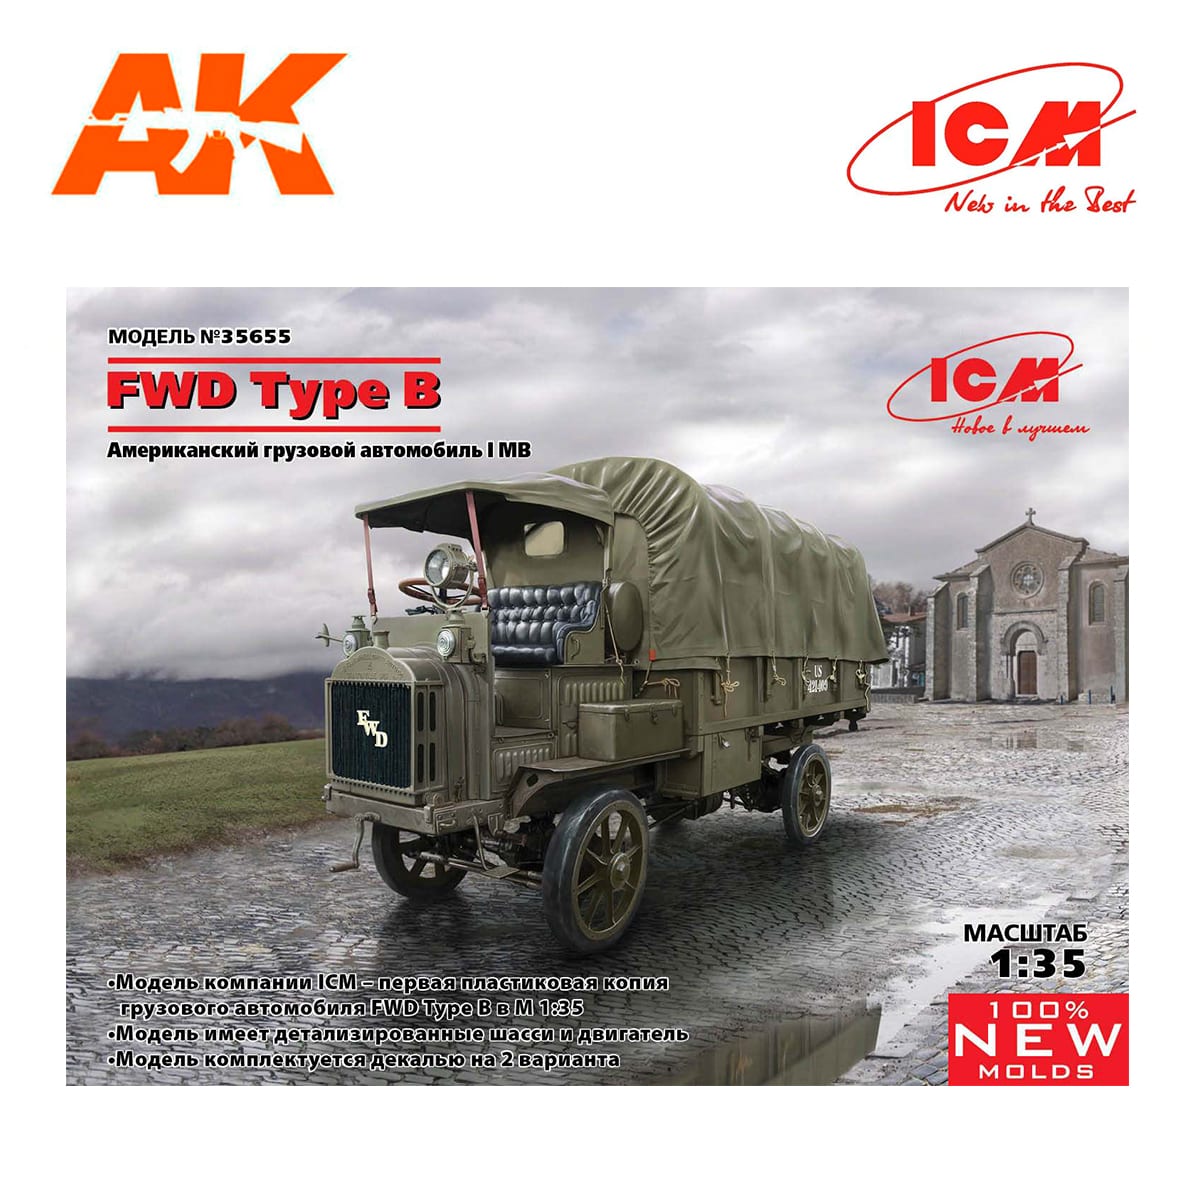 1fwd Type B WWI US Army Truck scale Model Kit 1/35 ICM 35655 for sale online 